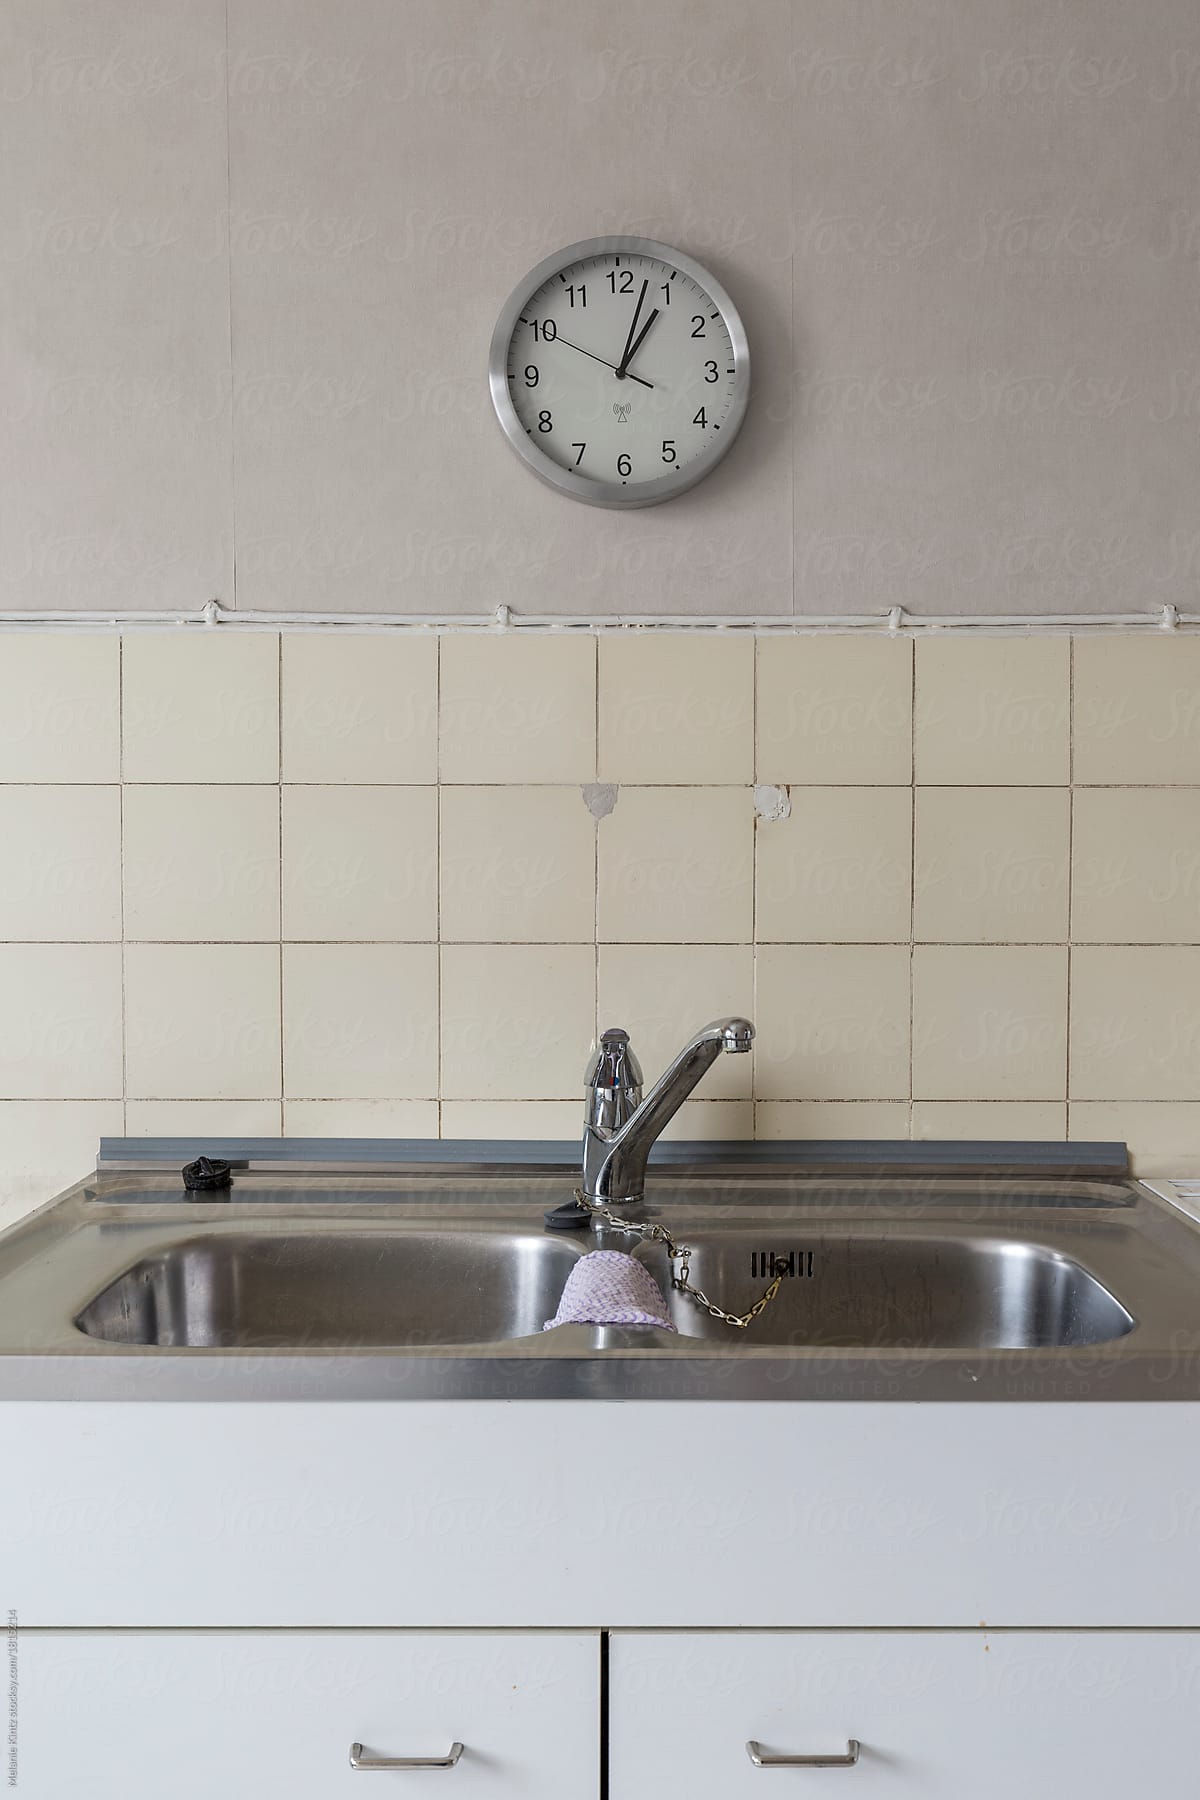 Kitchen sink in an out-of-date kitchen